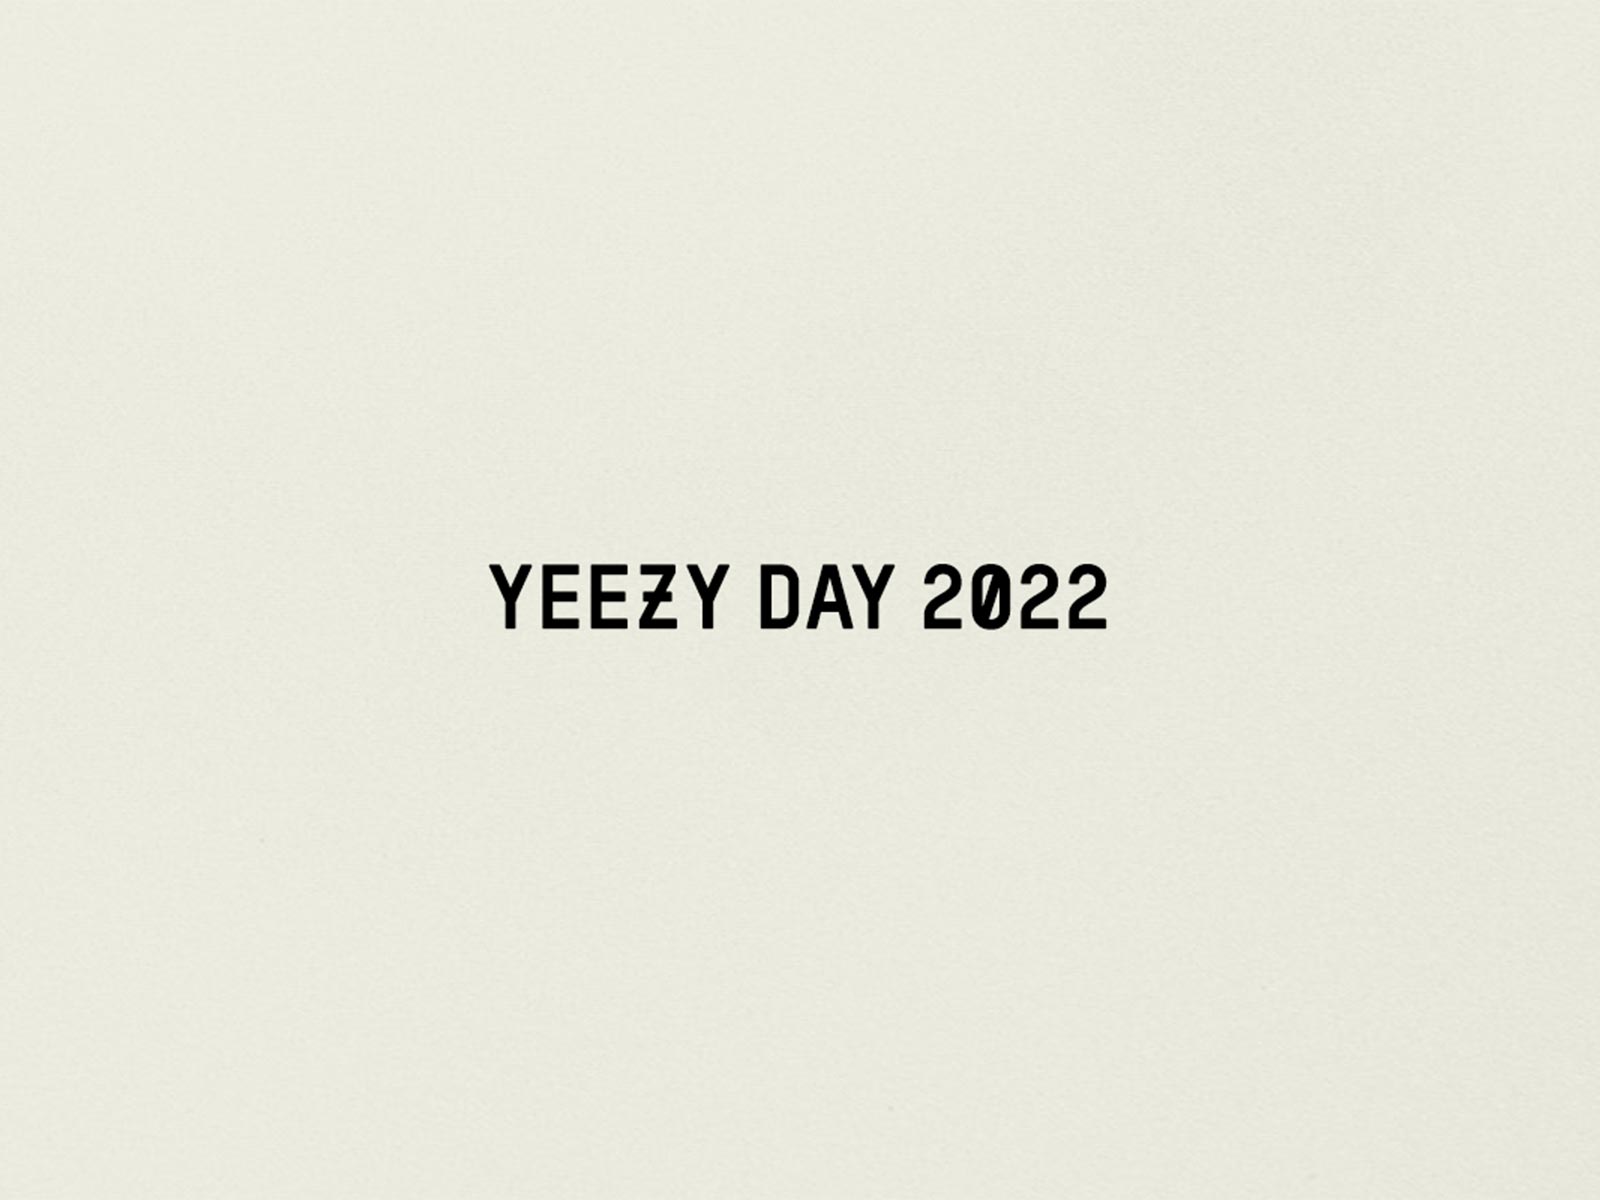 Everything you need to know about YEEZY Day 2022